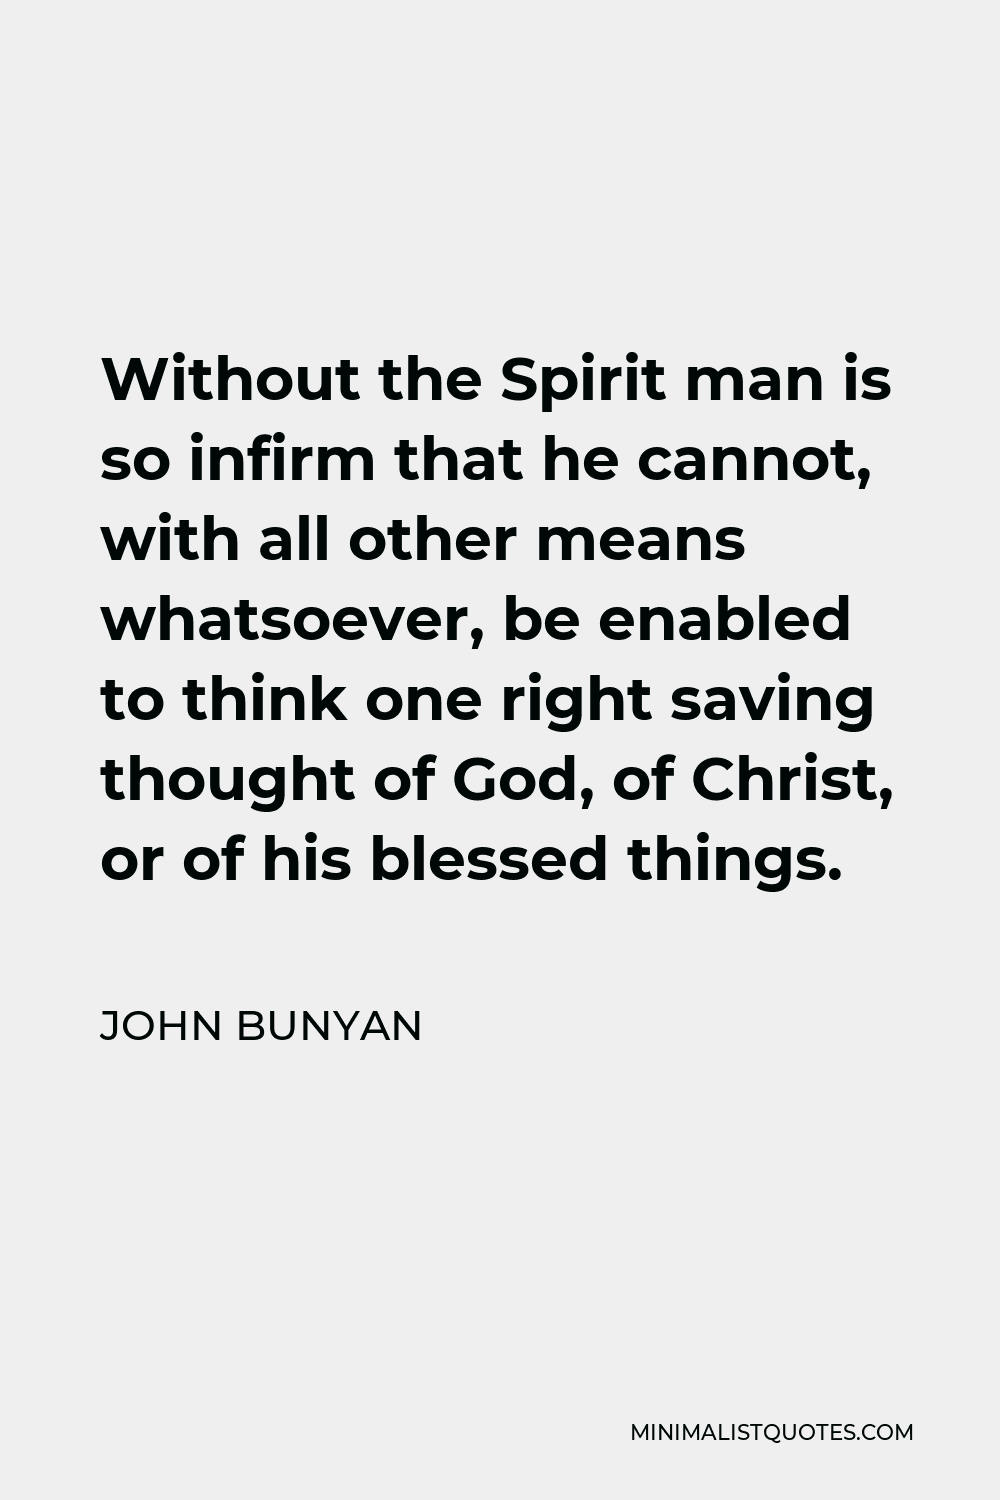 John Bunyan Quote - Without the Spirit man is so infirm that he cannot, with all other means whatsoever, be enabled to think one right saving thought of God, of Christ, or of his blessed things.